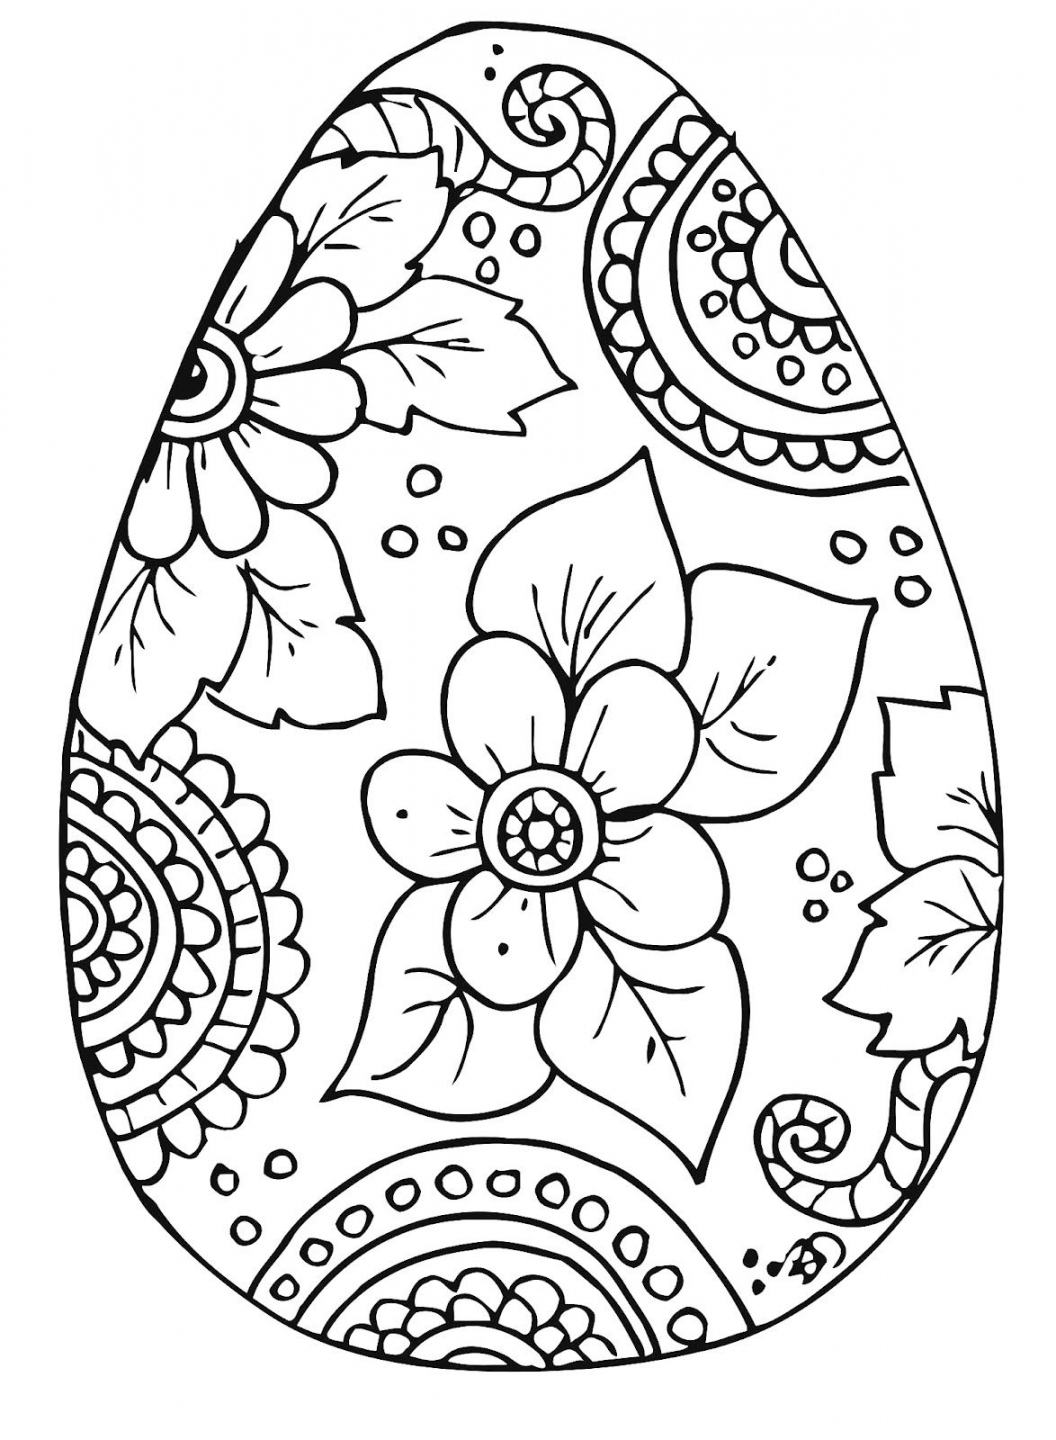 Free Easter Coloring Pages Printable - Printable - B.D